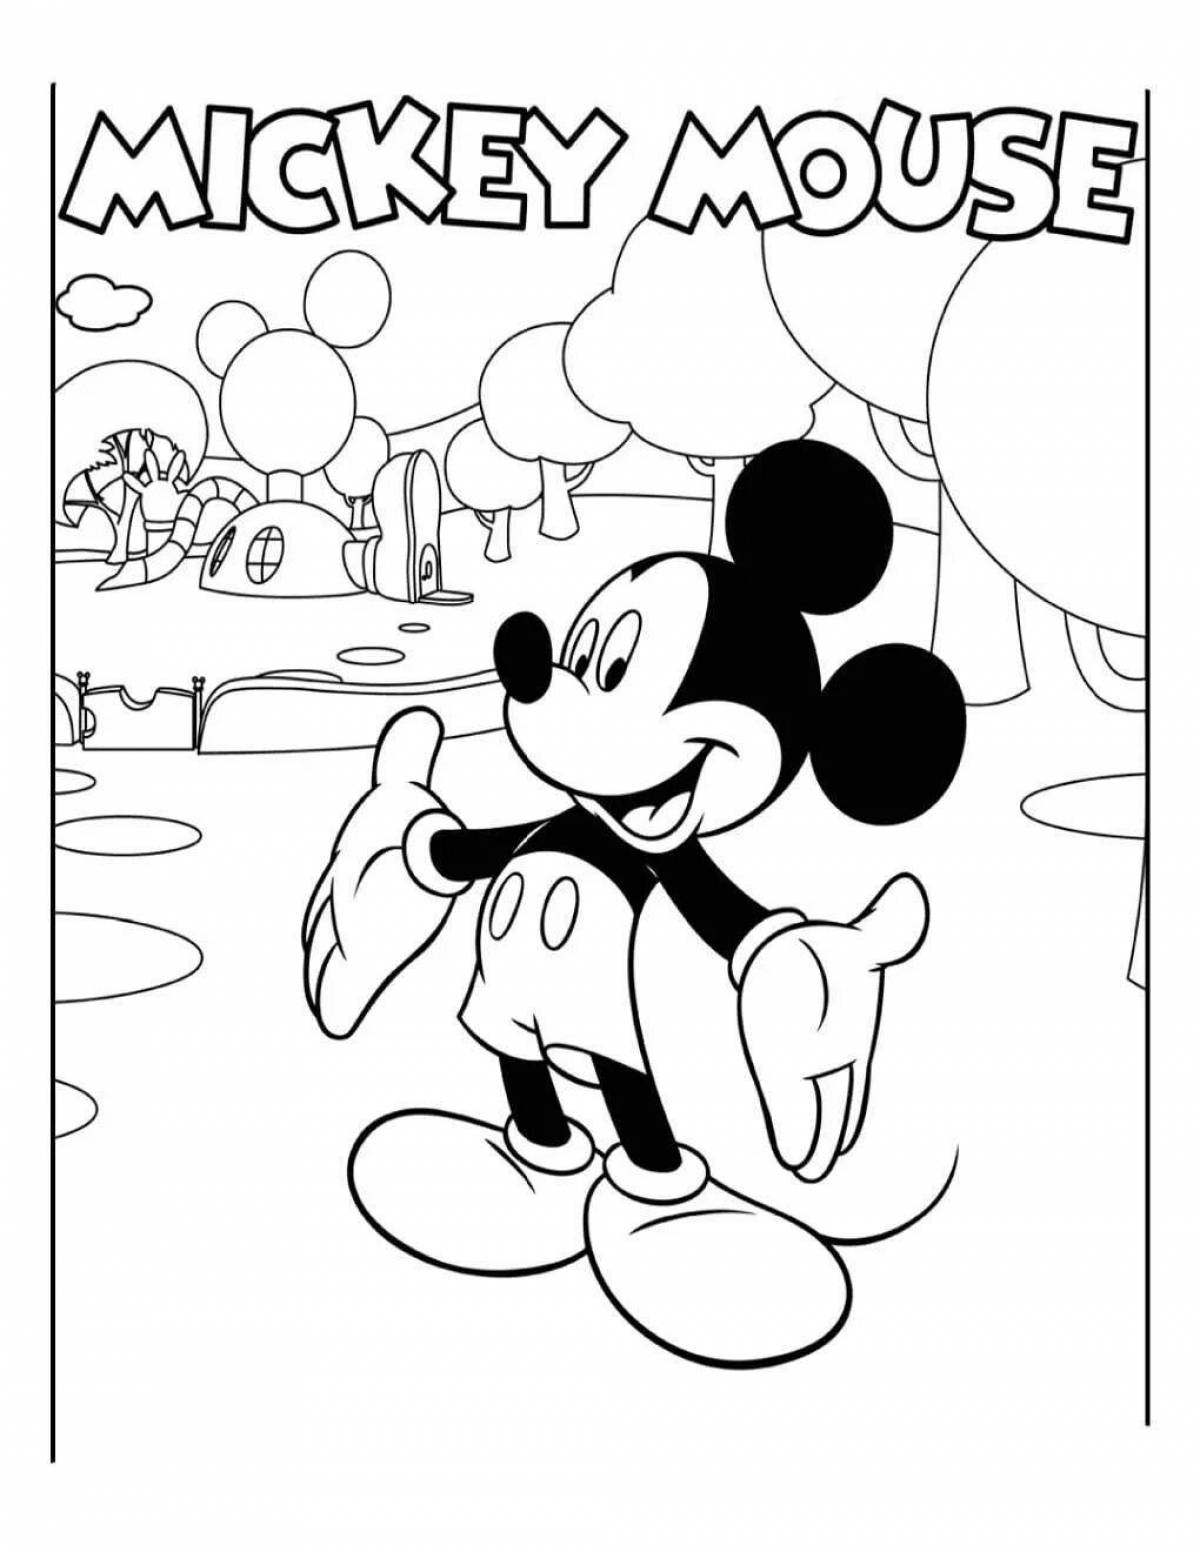 Mickey mouse #2